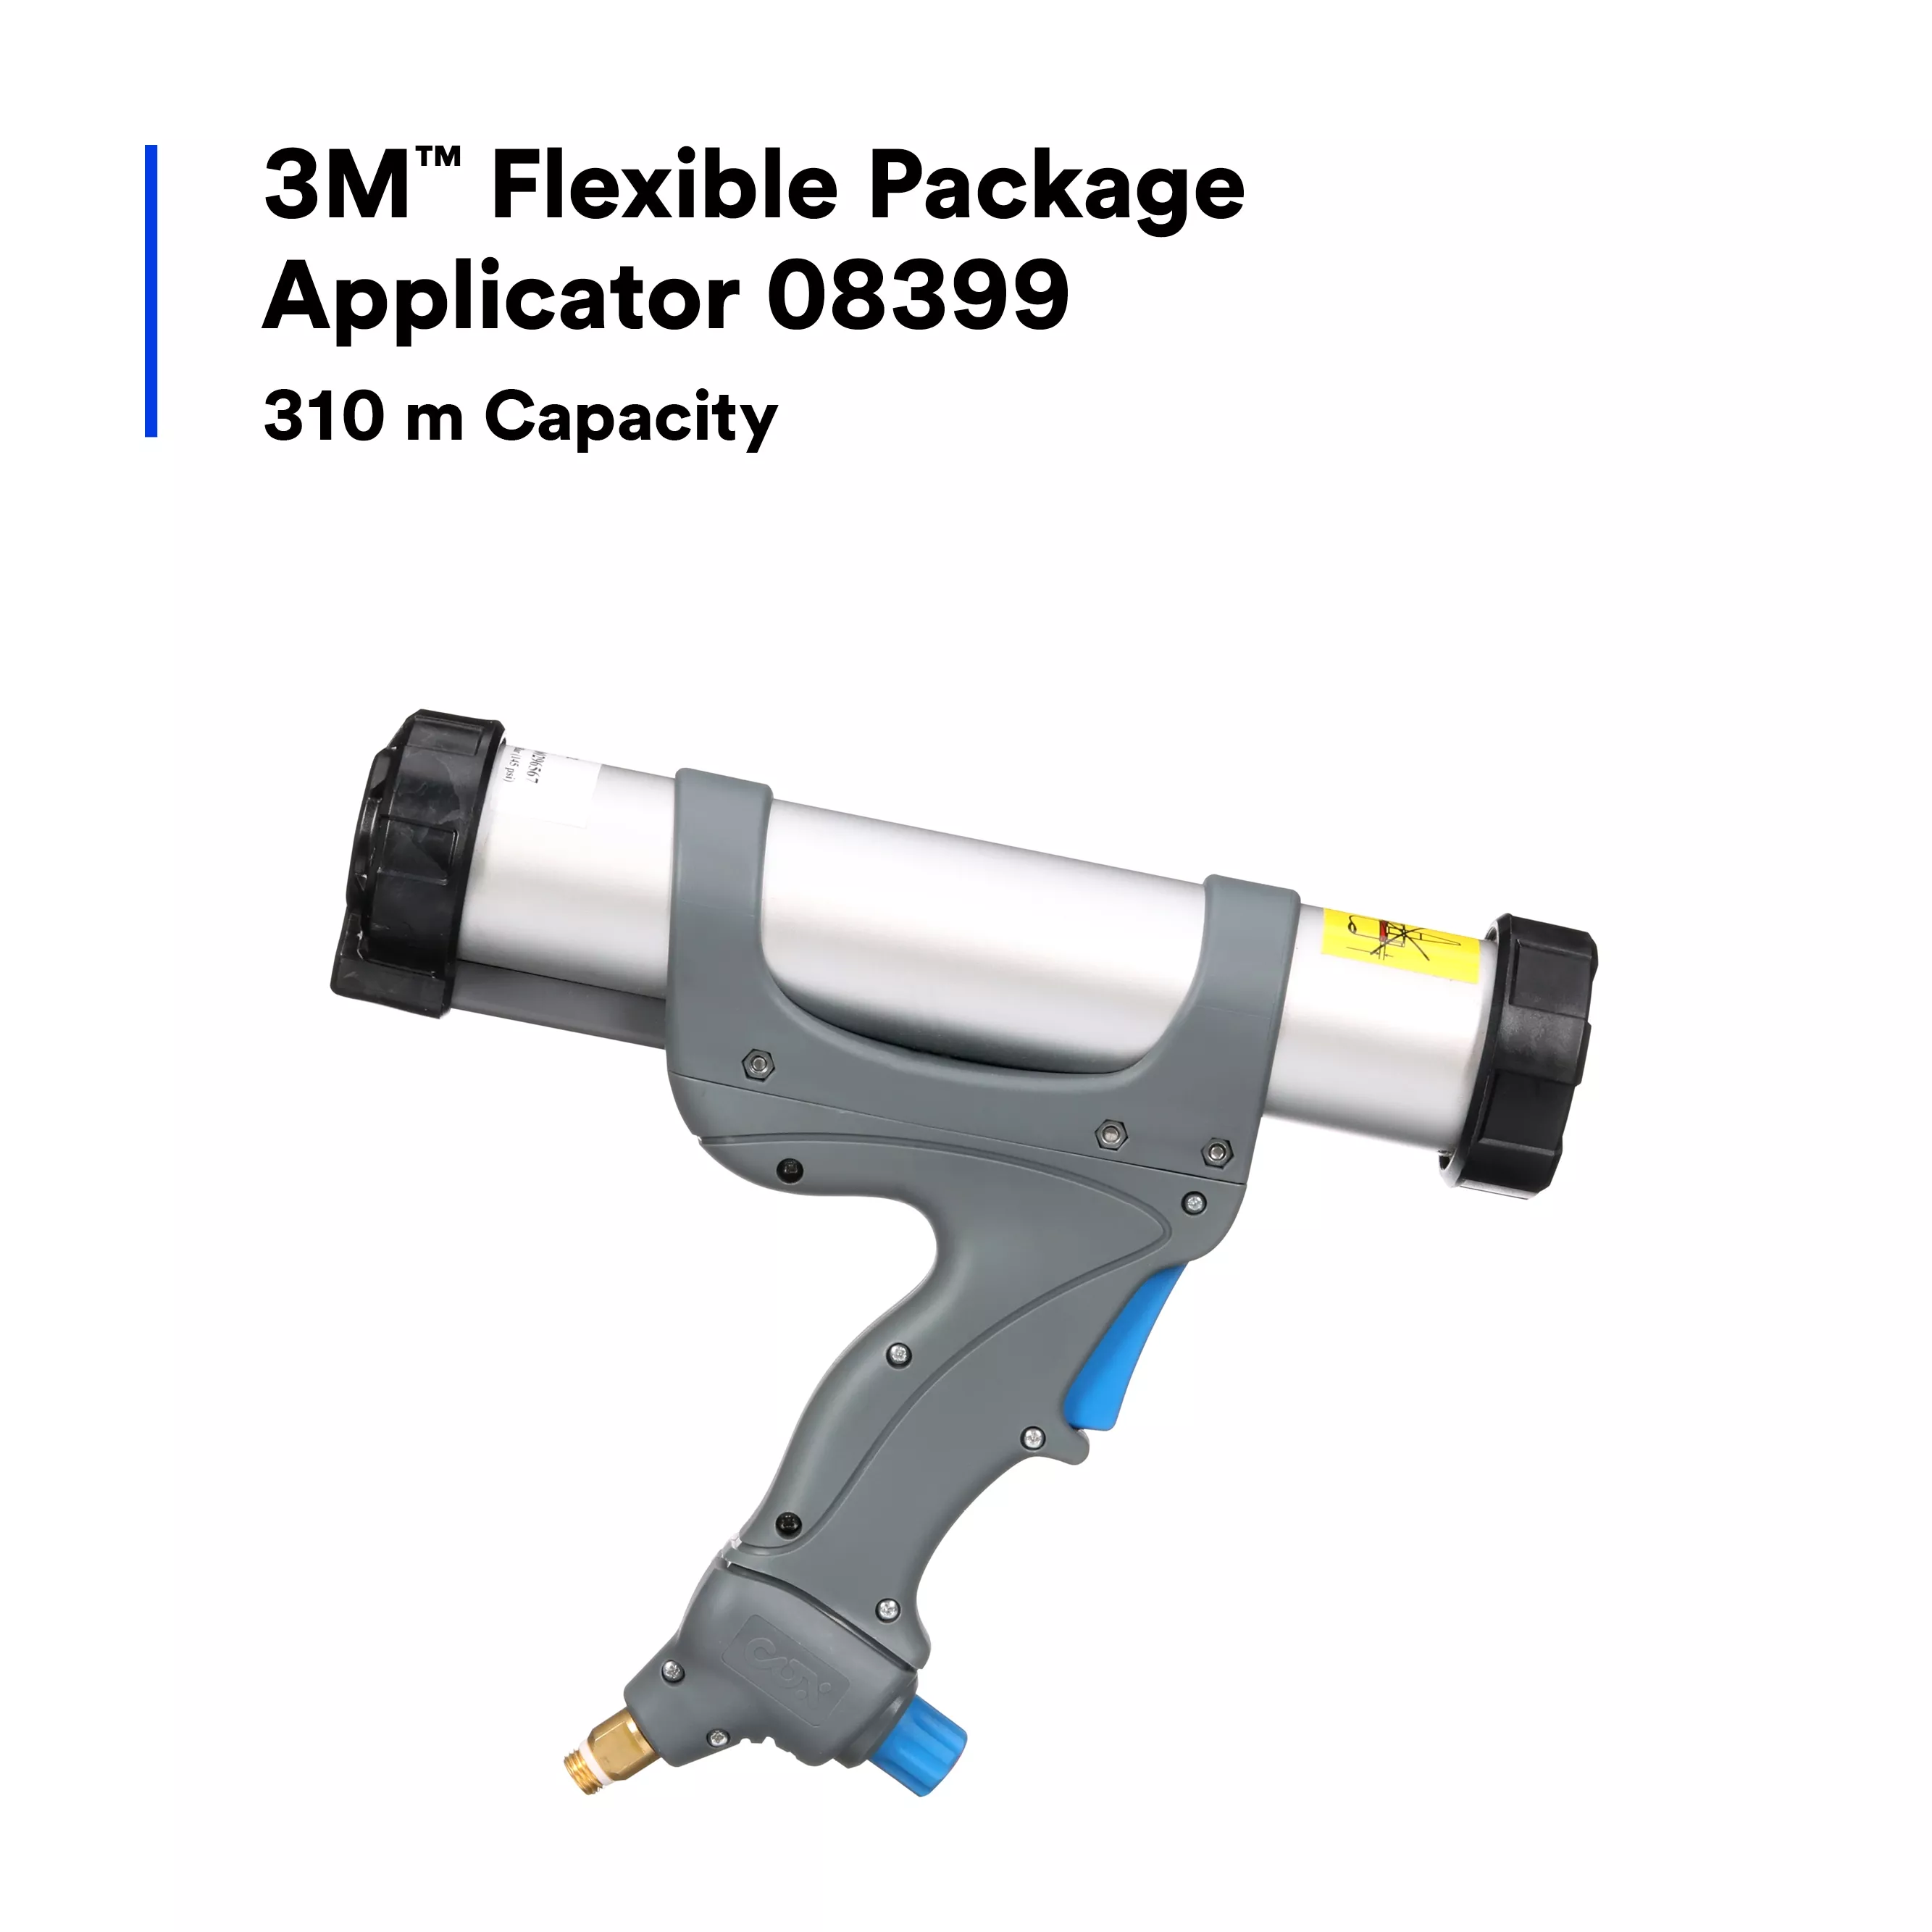 Product Number 08399 | 3M™ Flexible Package Applicator - Pneumatic